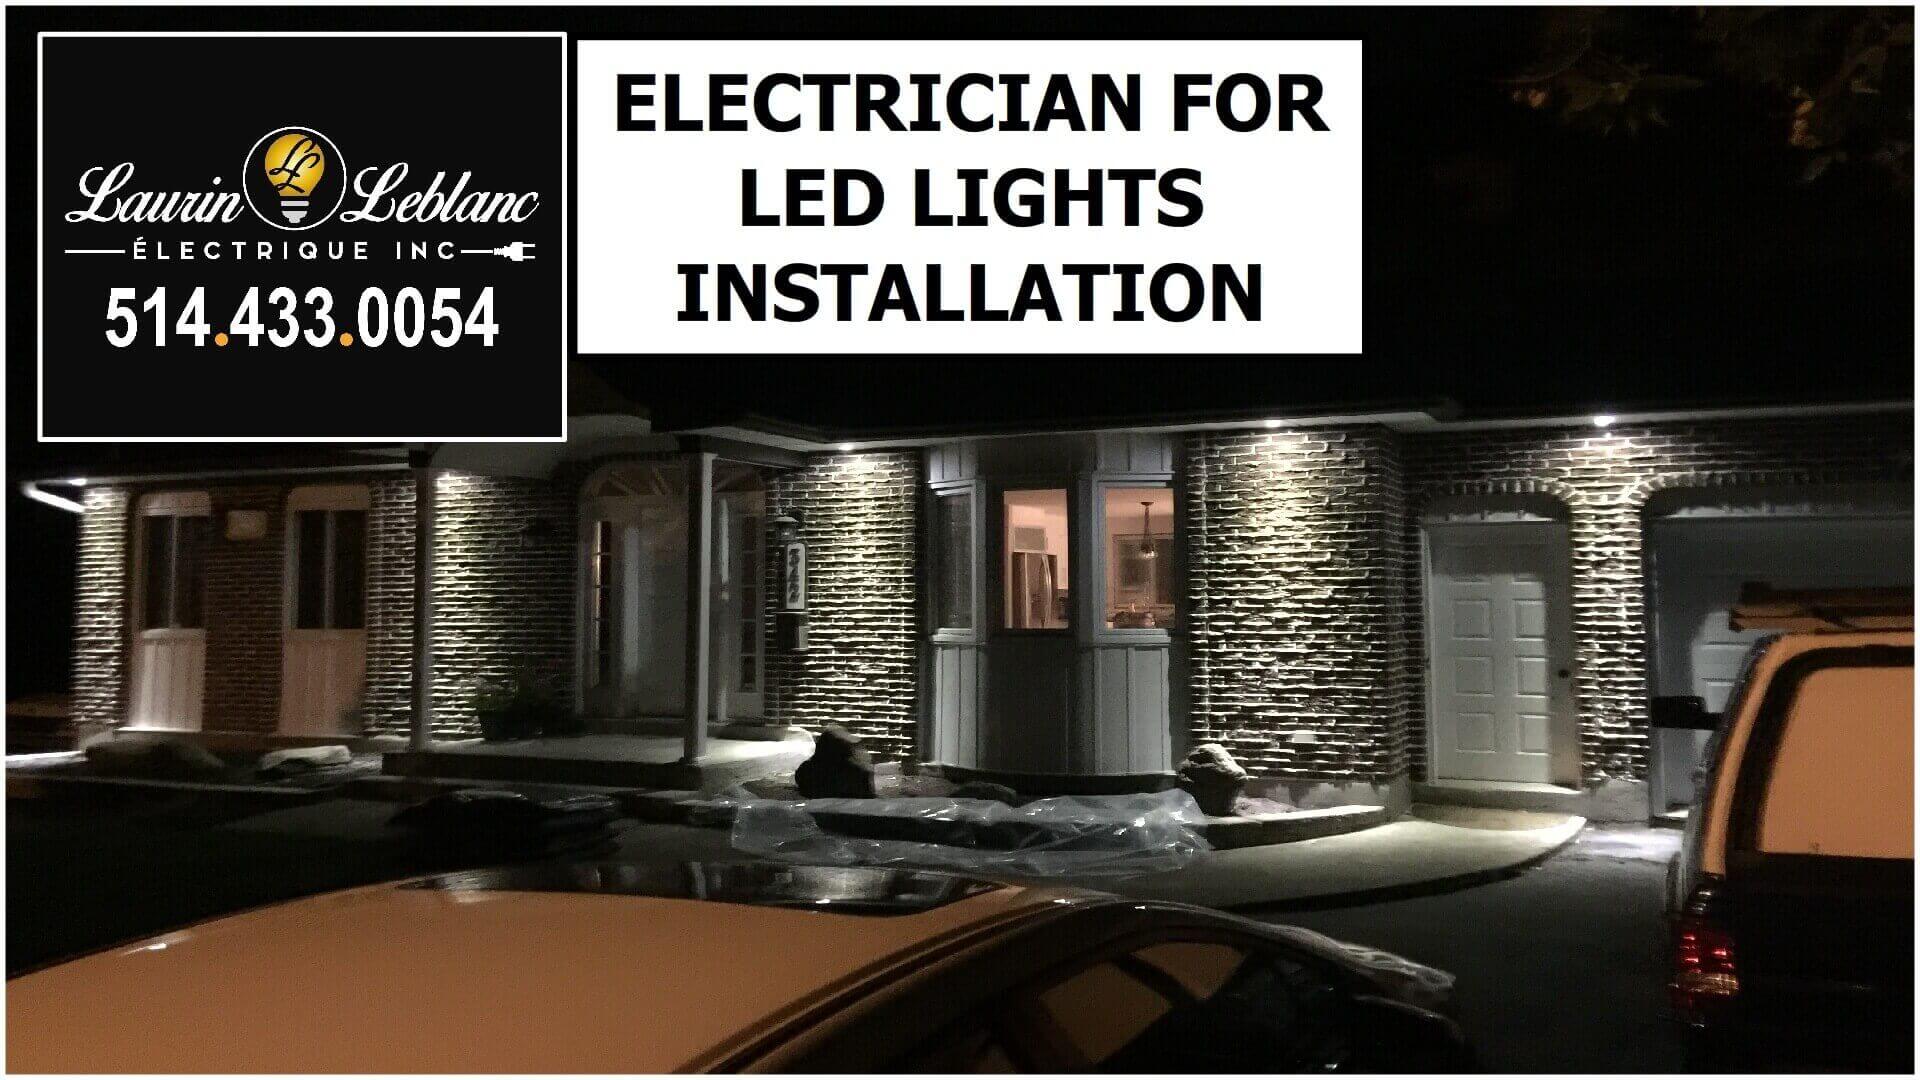 LED lights in Rigaud